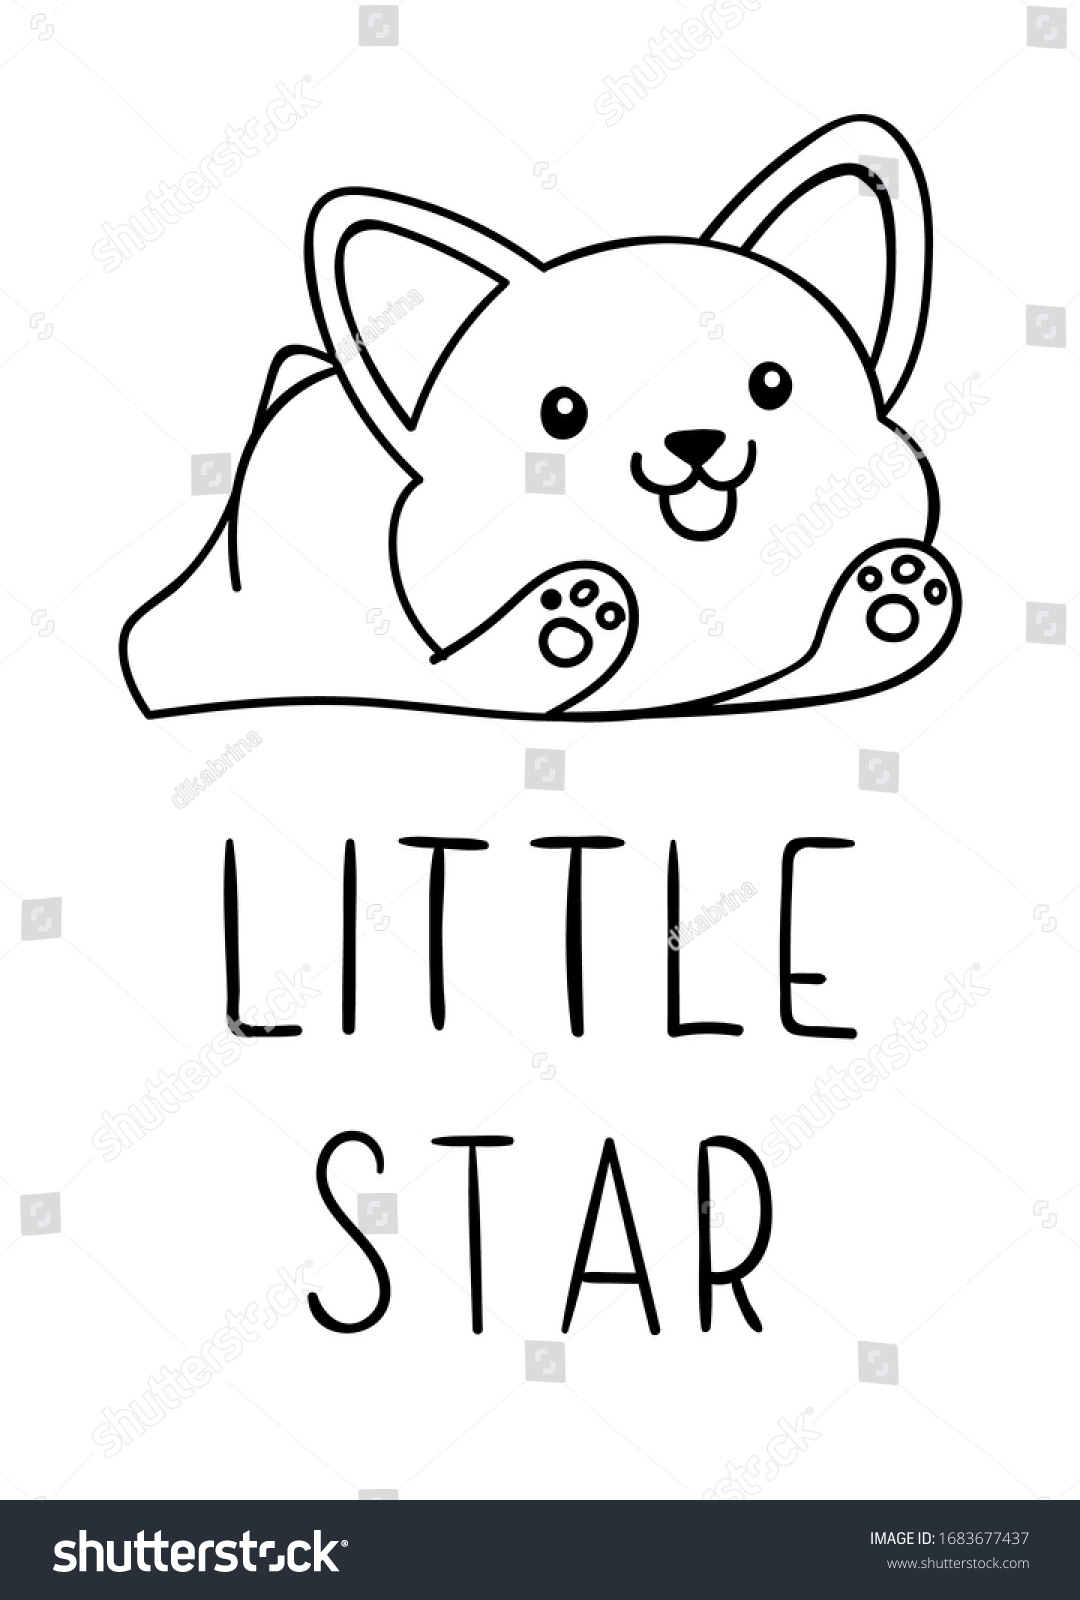 Coloring pages black white cute kawaii stock vector royalty free